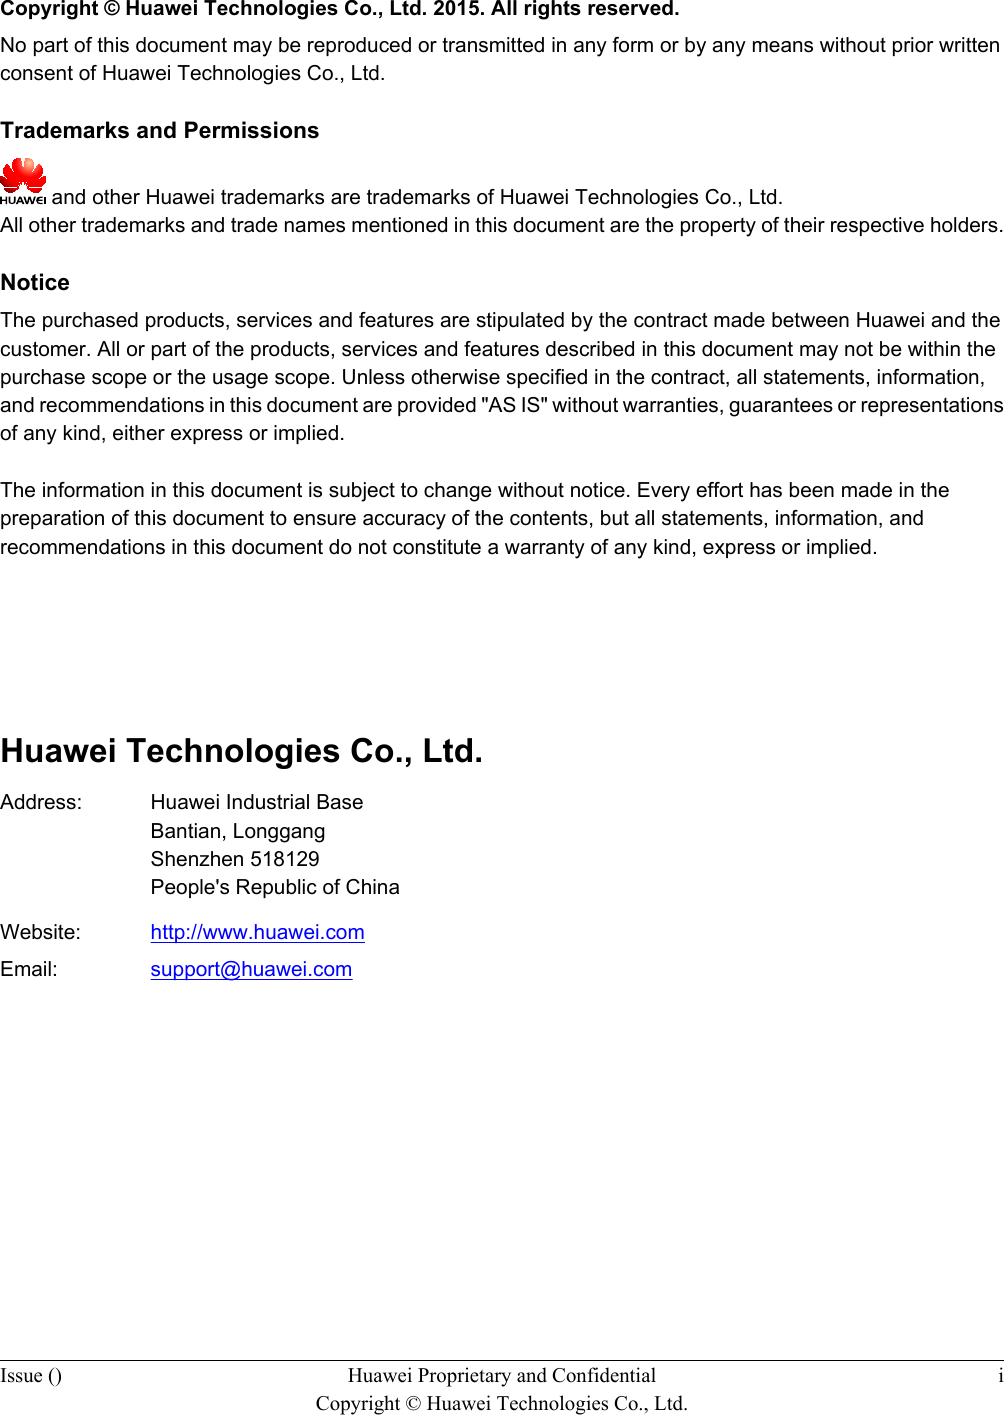   Copyright © Huawei Technologies Co., Ltd. 2015. All rights reserved.No part of this document may be reproduced or transmitted in any form or by any means without prior writtenconsent of Huawei Technologies Co., Ltd. Trademarks and Permissions and other Huawei trademarks are trademarks of Huawei Technologies Co., Ltd.All other trademarks and trade names mentioned in this document are the property of their respective holders. NoticeThe purchased products, services and features are stipulated by the contract made between Huawei and thecustomer. All or part of the products, services and features described in this document may not be within thepurchase scope or the usage scope. Unless otherwise specified in the contract, all statements, information,and recommendations in this document are provided &quot;AS IS&quot; without warranties, guarantees or representationsof any kind, either express or implied.The information in this document is subject to change without notice. Every effort has been made in thepreparation of this document to ensure accuracy of the contents, but all statements, information, andrecommendations in this document do not constitute a warranty of any kind, express or implied.       Huawei Technologies Co., Ltd.Address: Huawei Industrial BaseBantian, LonggangShenzhen 518129People&apos;s Republic of ChinaWebsite: http://www.huawei.comEmail: support@huawei.comIssue () Huawei Proprietary and ConfidentialCopyright © Huawei Technologies Co., Ltd.i